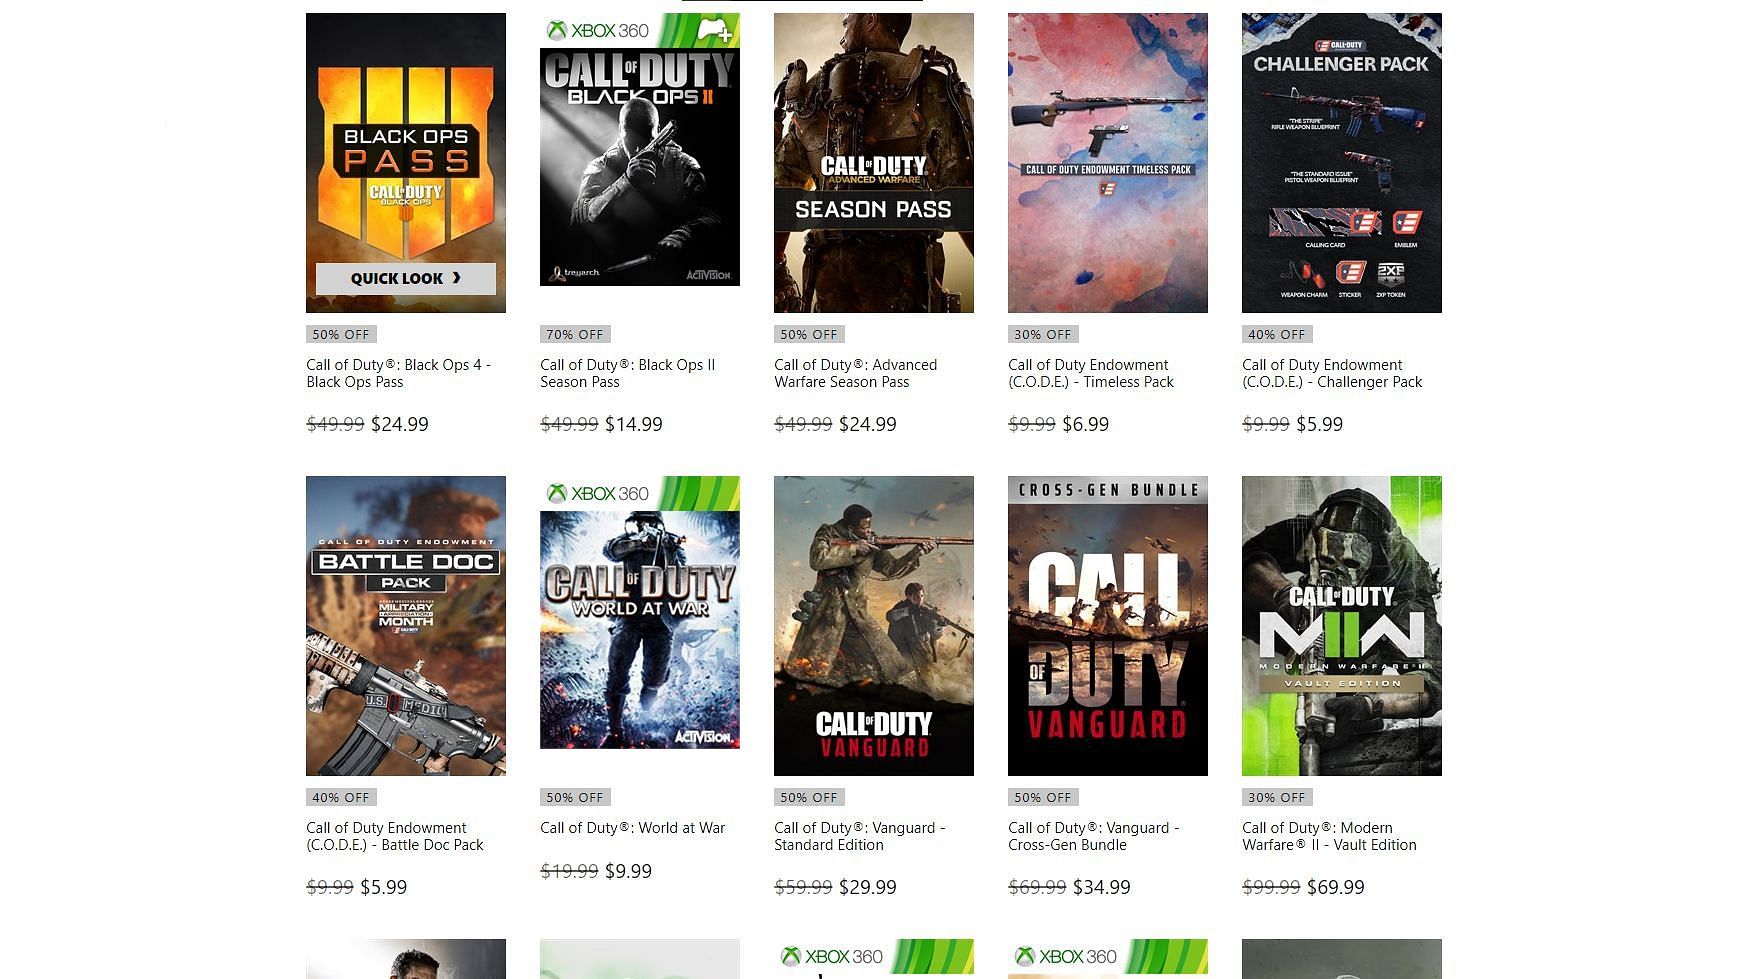 Buy Call of Duty games for discounted prices (Image via Xbox)